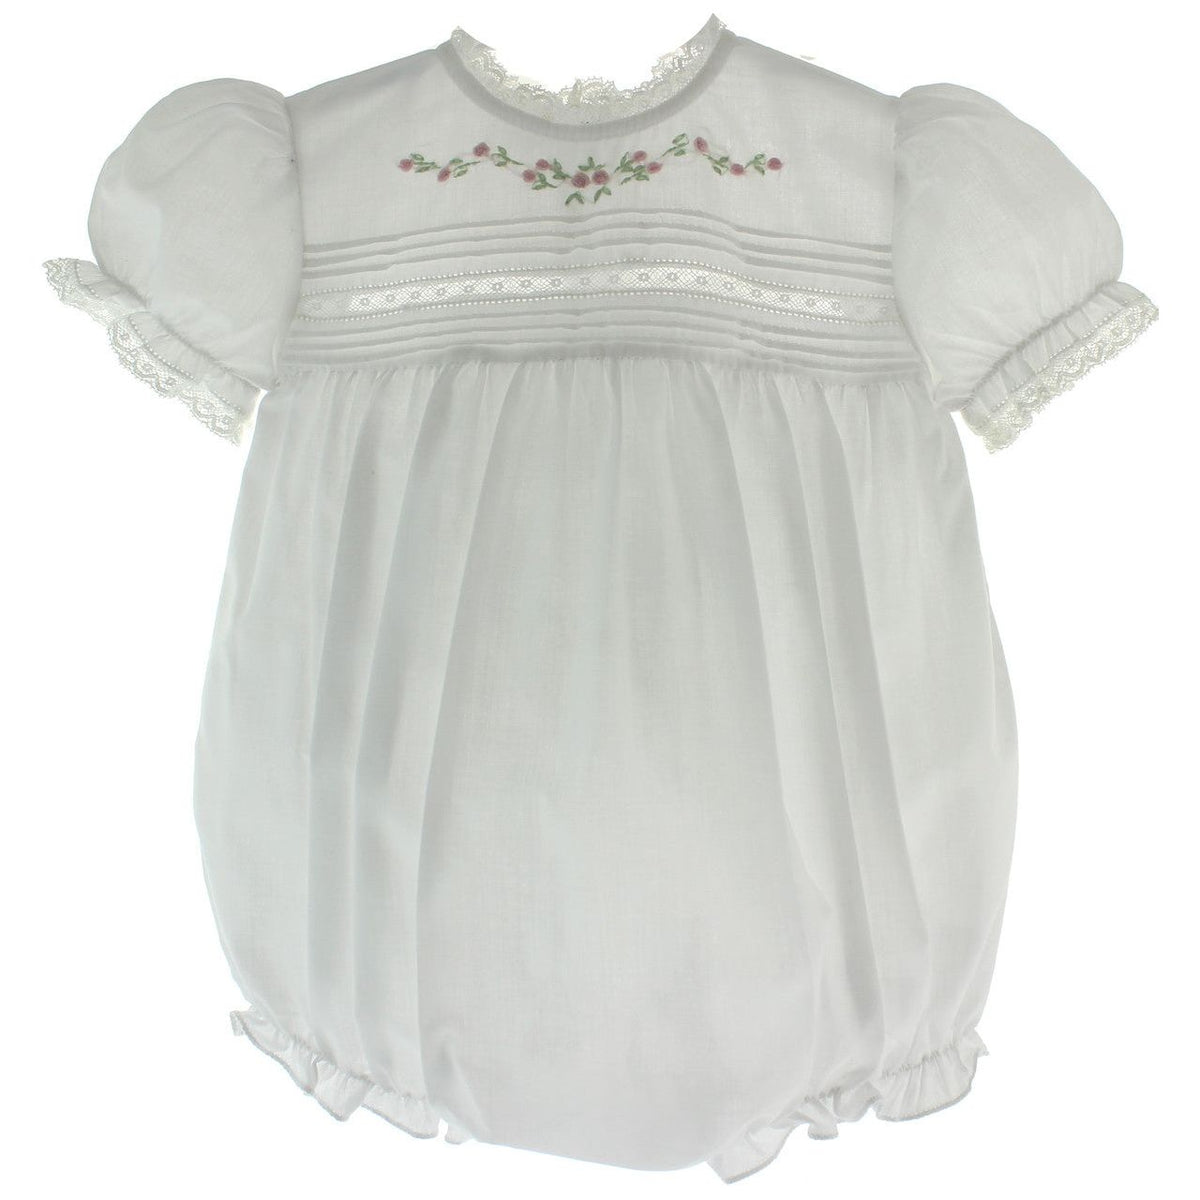 Infant Girls White Heirloom Bubble Outfit Pink Flowers